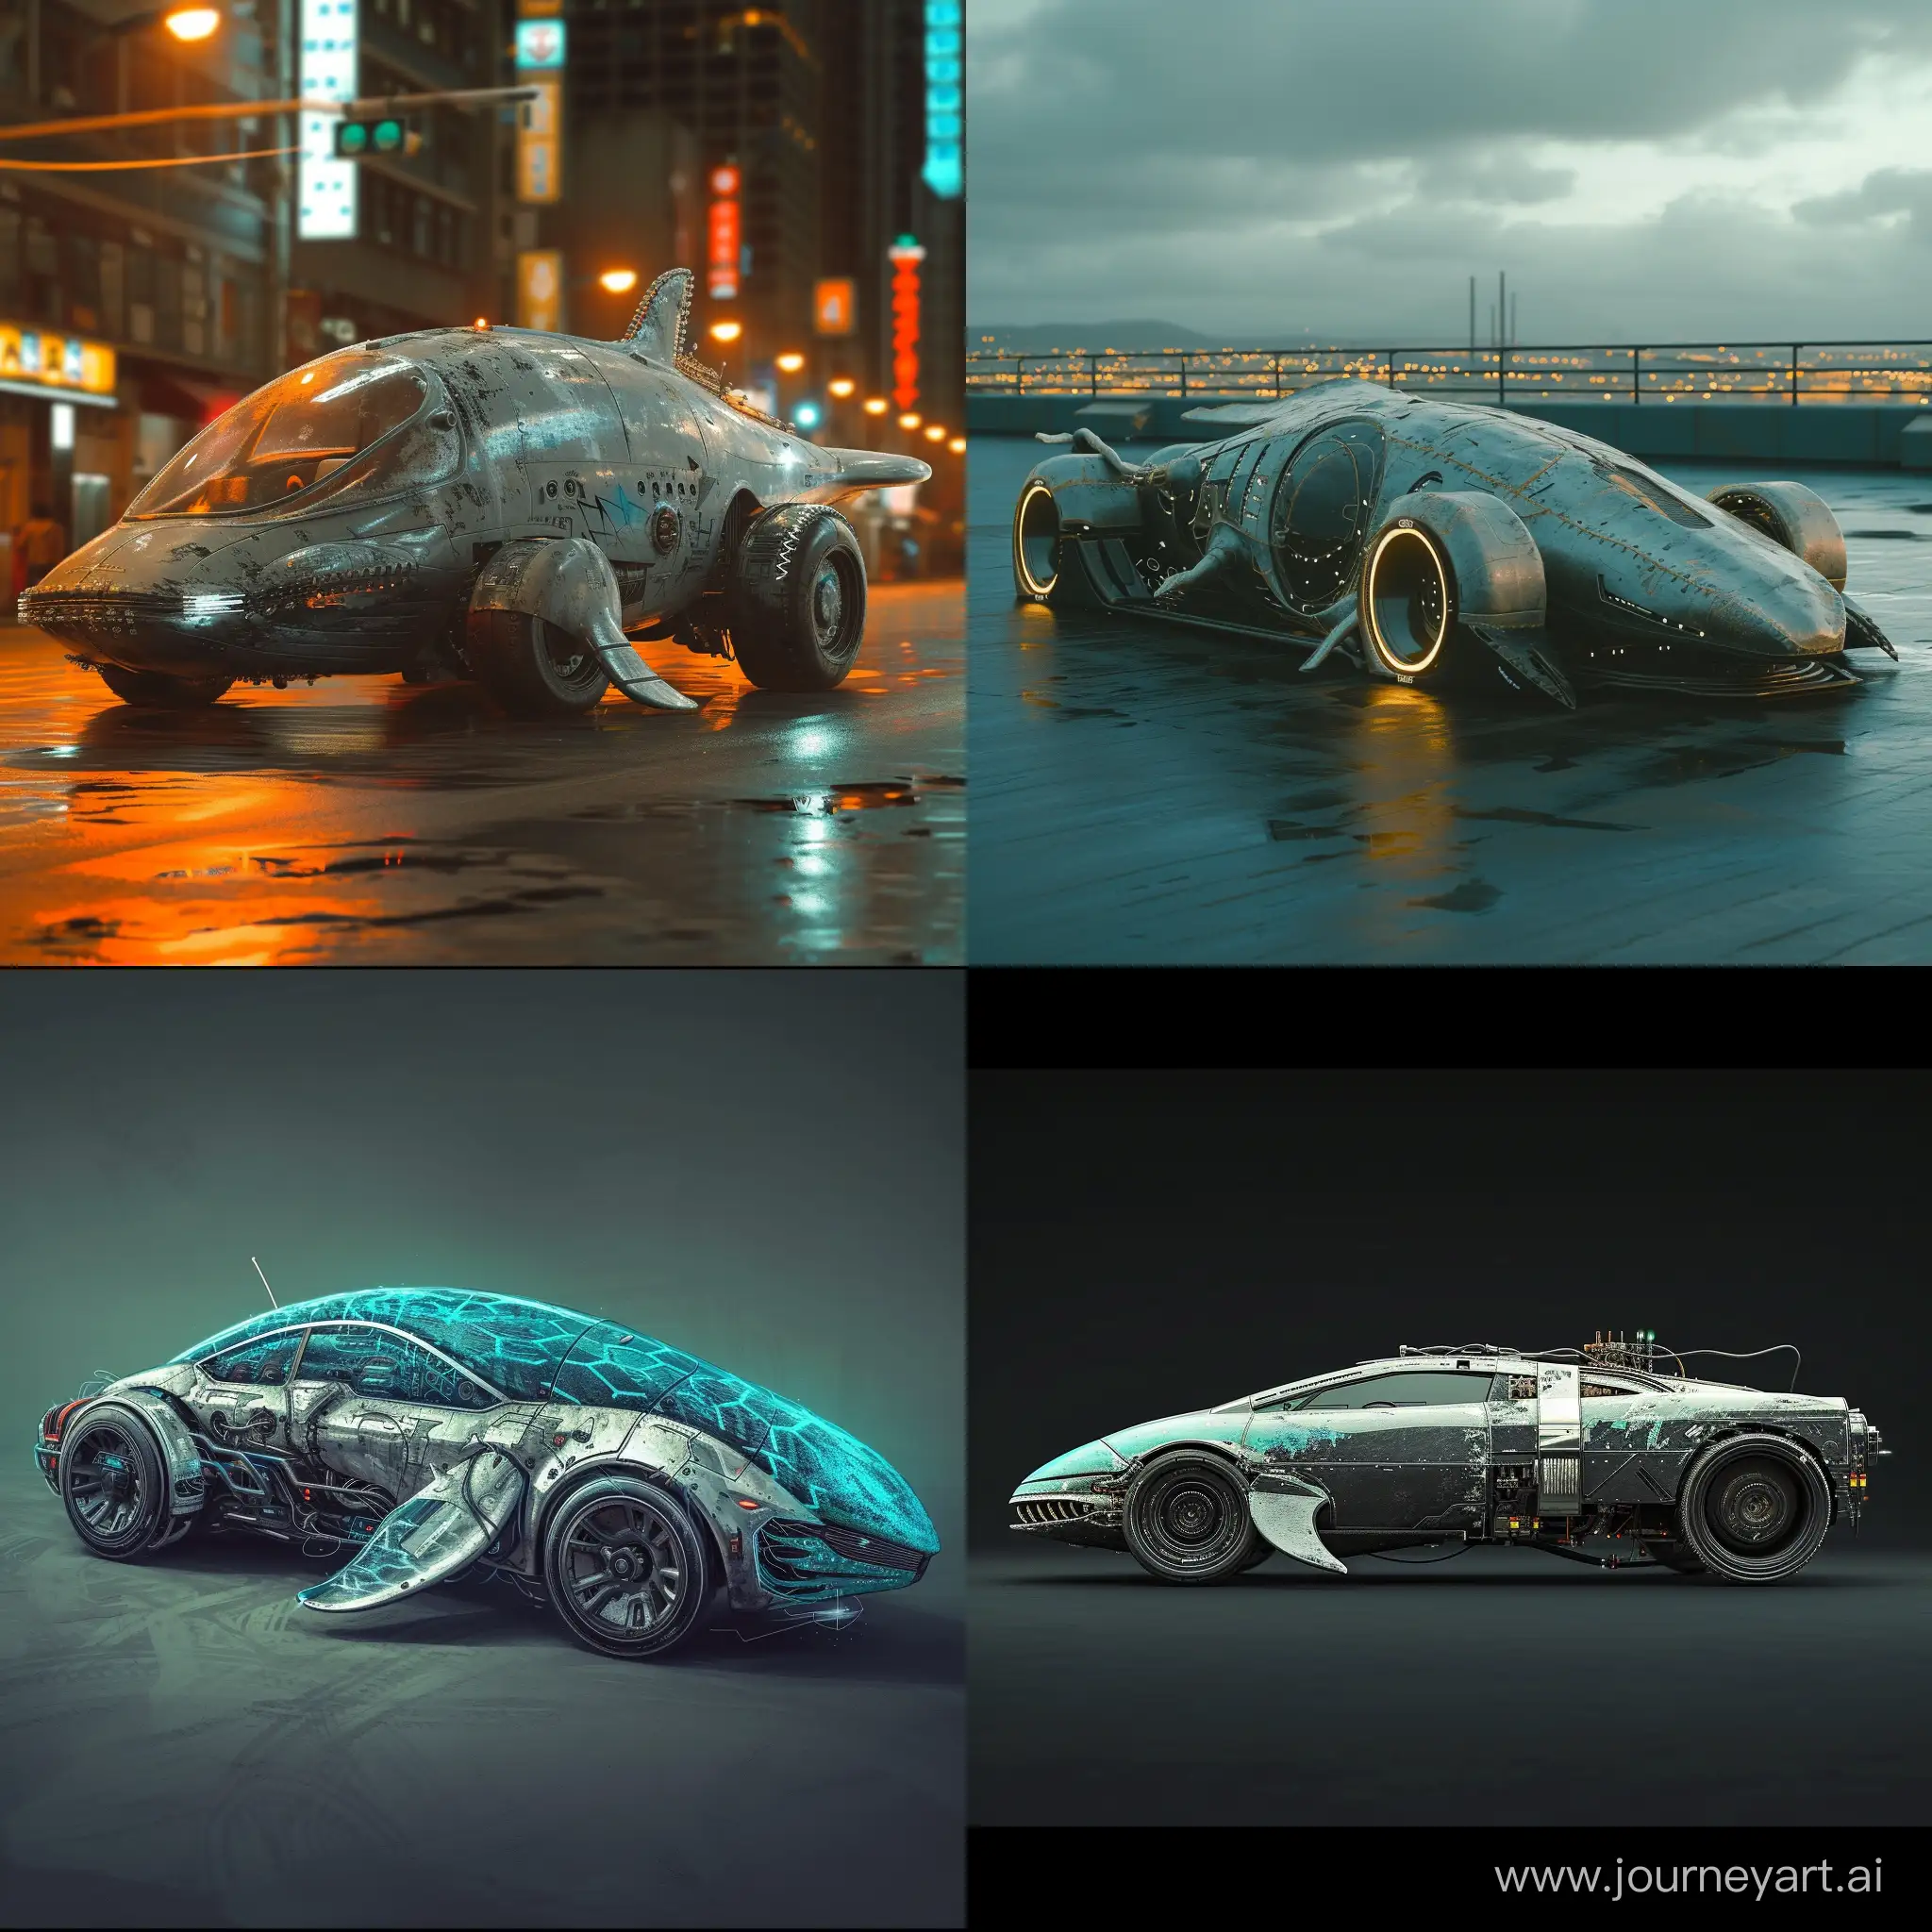 Futuristic-Cyberpunk-Car-Design-Inspired-by-the-Majesty-of-Whales